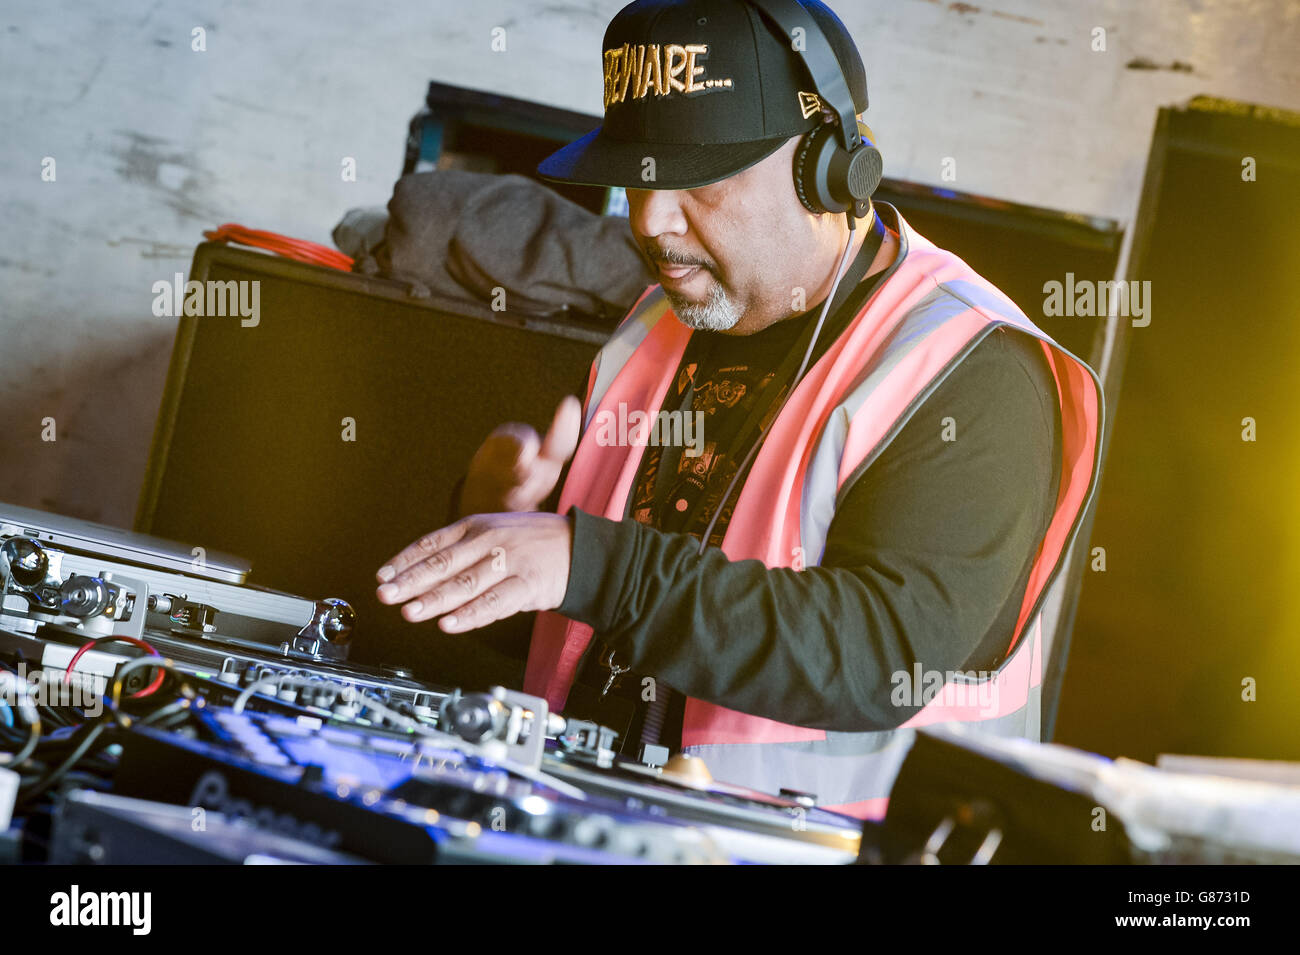 Breakbeat Lou performs on stage during the first live music event at Banksy's Dismaland, Tropicana in Weston-super-Mare, Somerset. Stock Photo